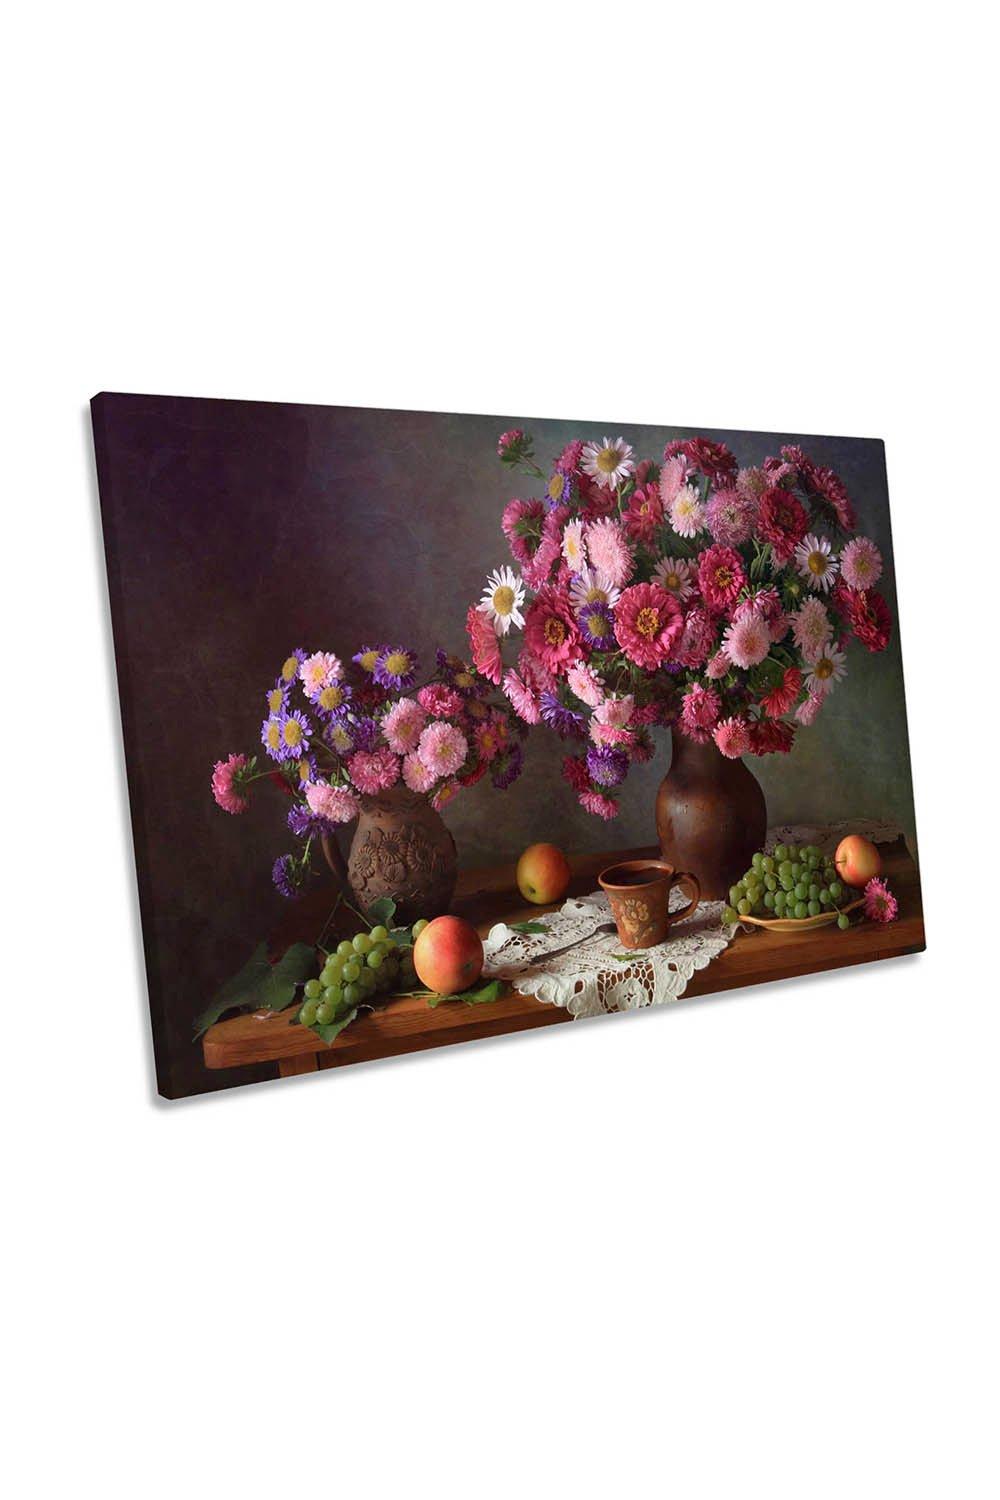 Flower Bouquet Still Life Pink Floral Canvas Wall Art Picture Print